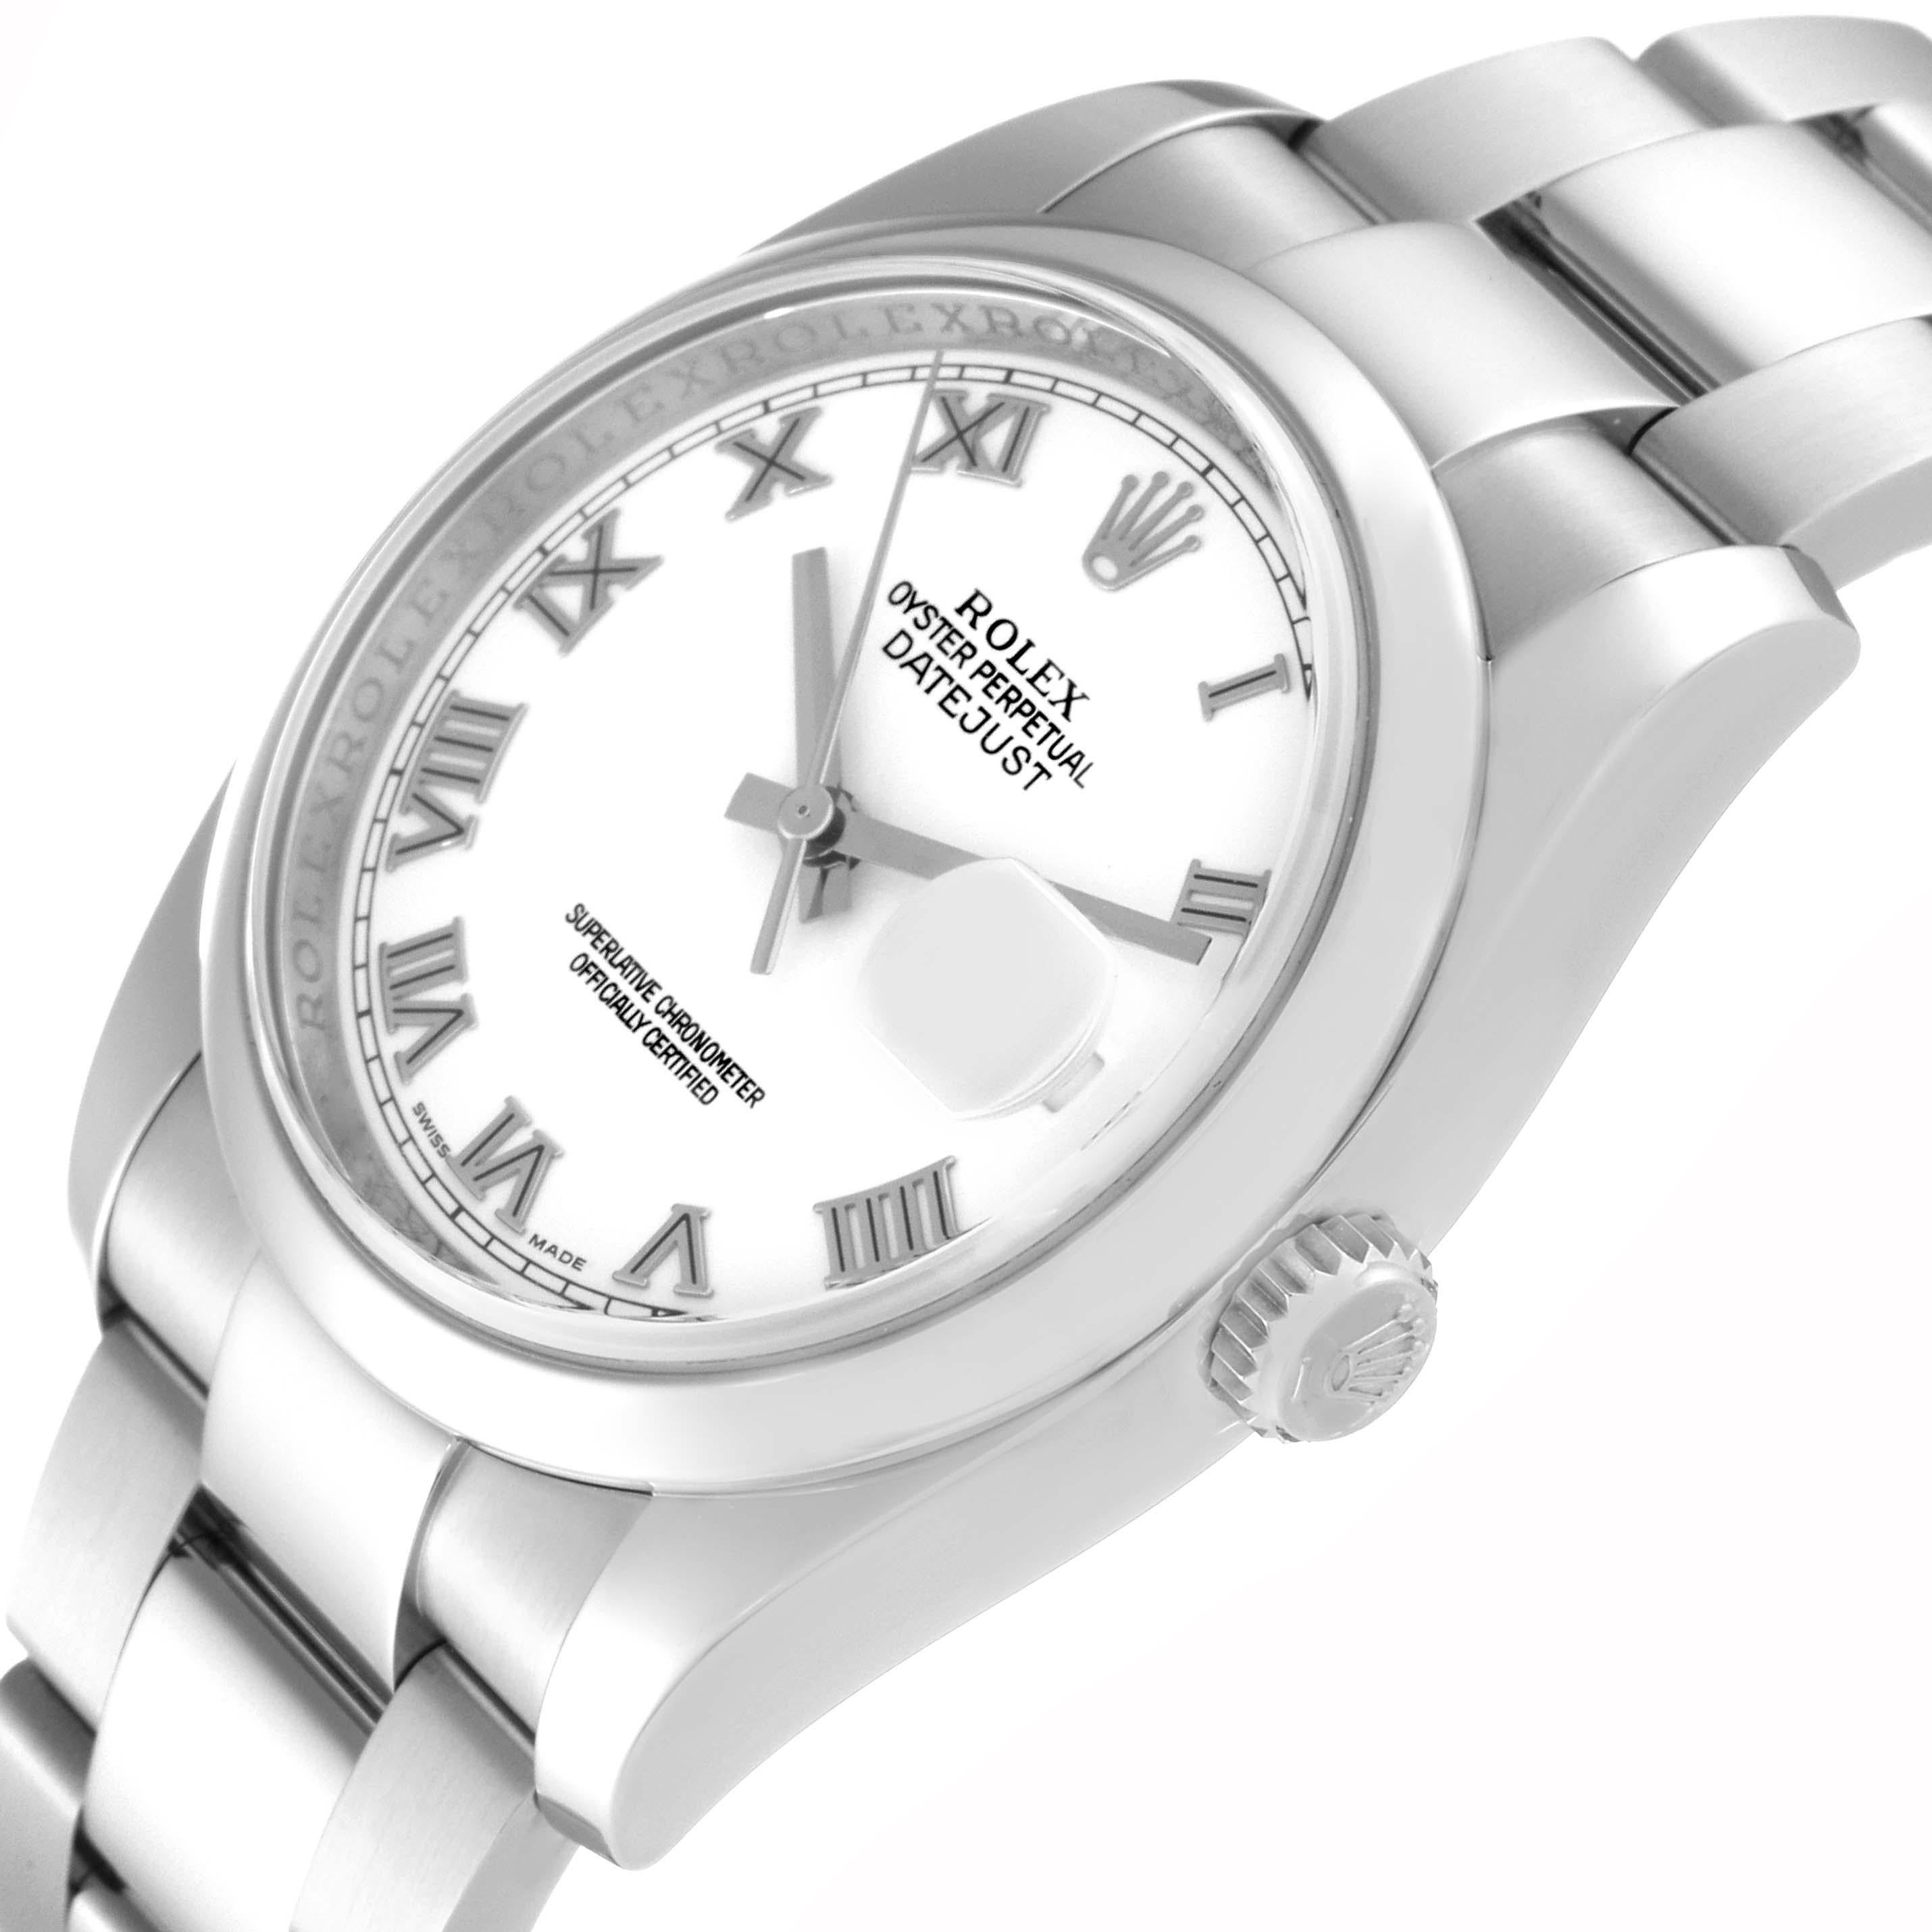 Rolex Datejust White Roman Dial Steel Mens Watch 116200 Box Card For Sale 4